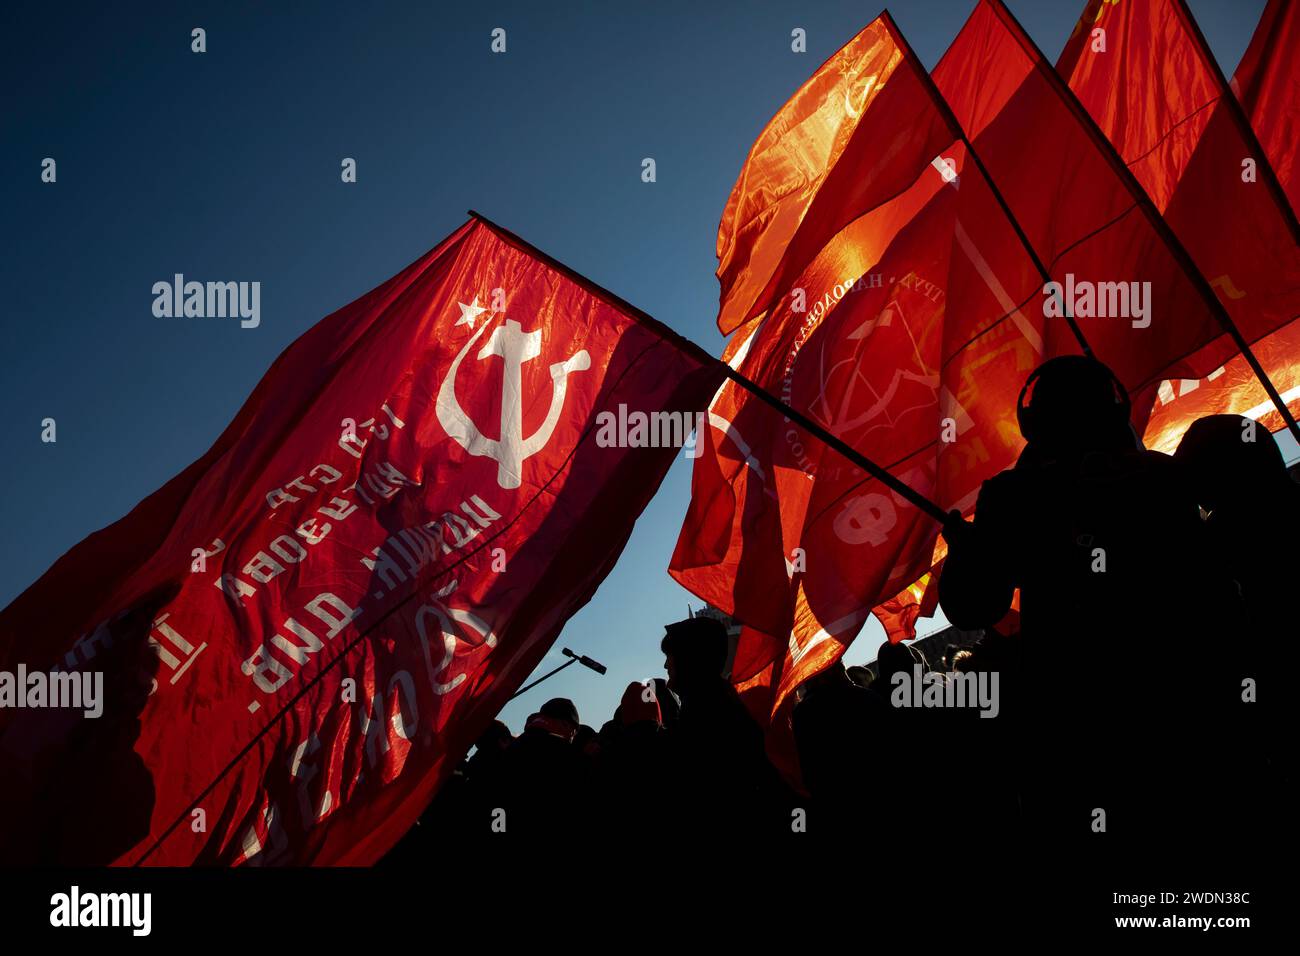 Moscow, Russia. 21st of January, 2024. Russian Communist supporters carry red flags as they walk to lay flowers at the Mausoleum of the Soviet founder Vladimir Lenin to mark the 100th anniversary of his death, in Red Square, Moscow, Russia. Credit: Nikolay Vinokurov/Alamy Live News Stock Photo